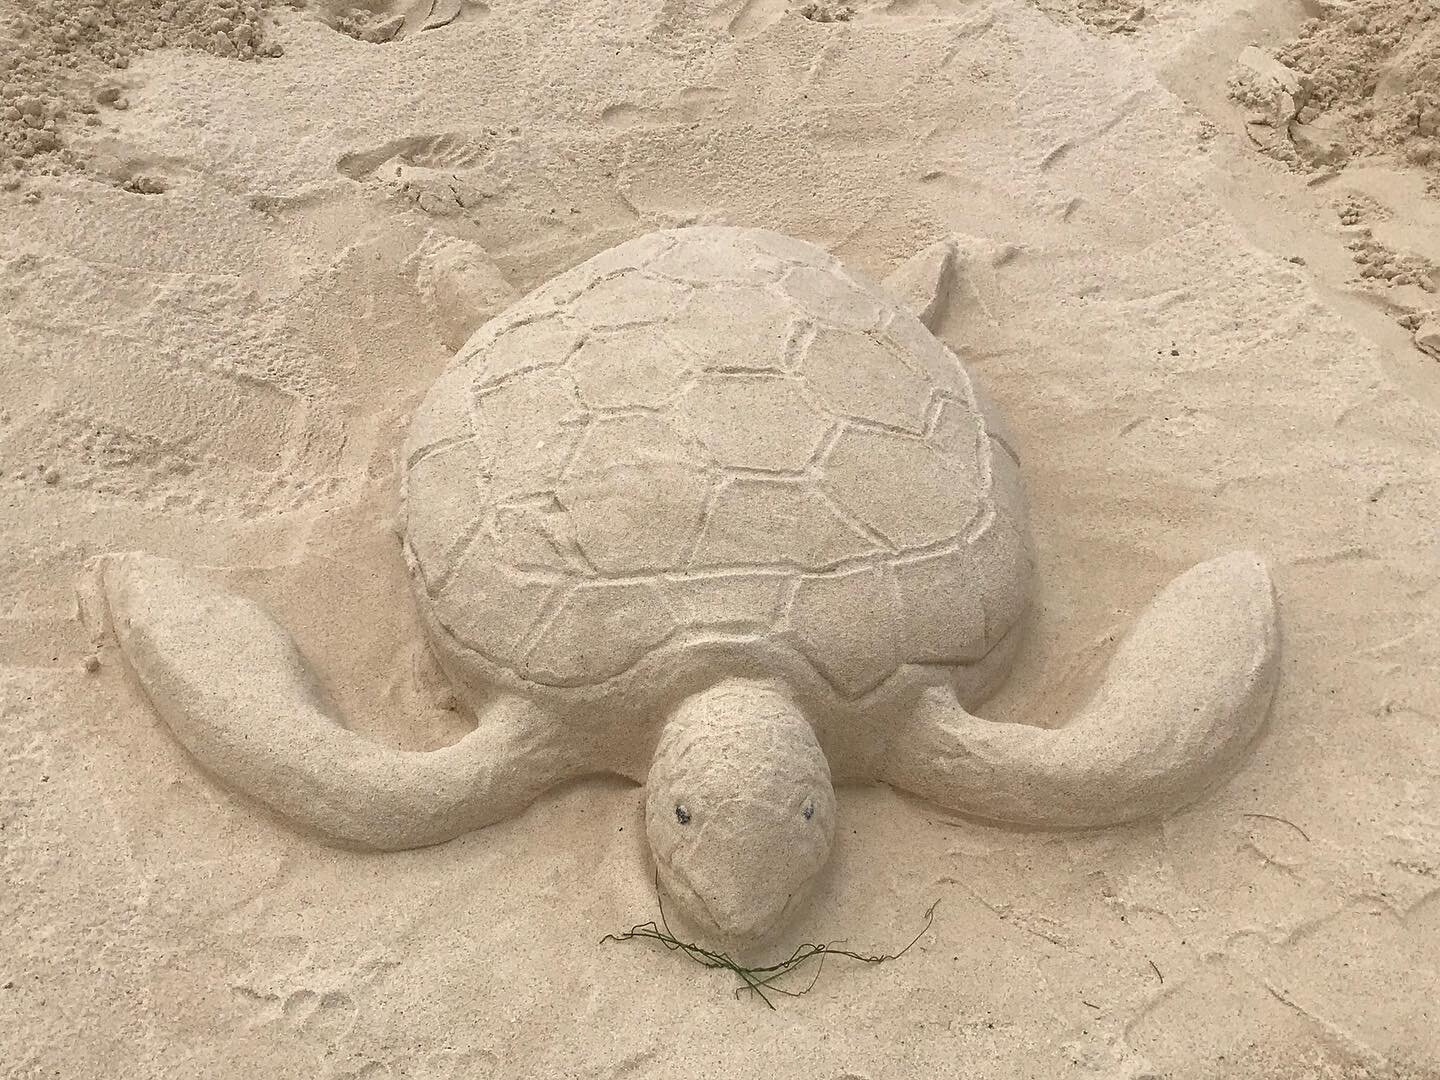 Some people build sandcastles and others do this.... 🐢 We have been busy planning our return to you, to retreat together again before too long. In person and virtually. We miss you!
📸 : From August 2019. 🐢 built by HWI co-founder @melissaindot &ls